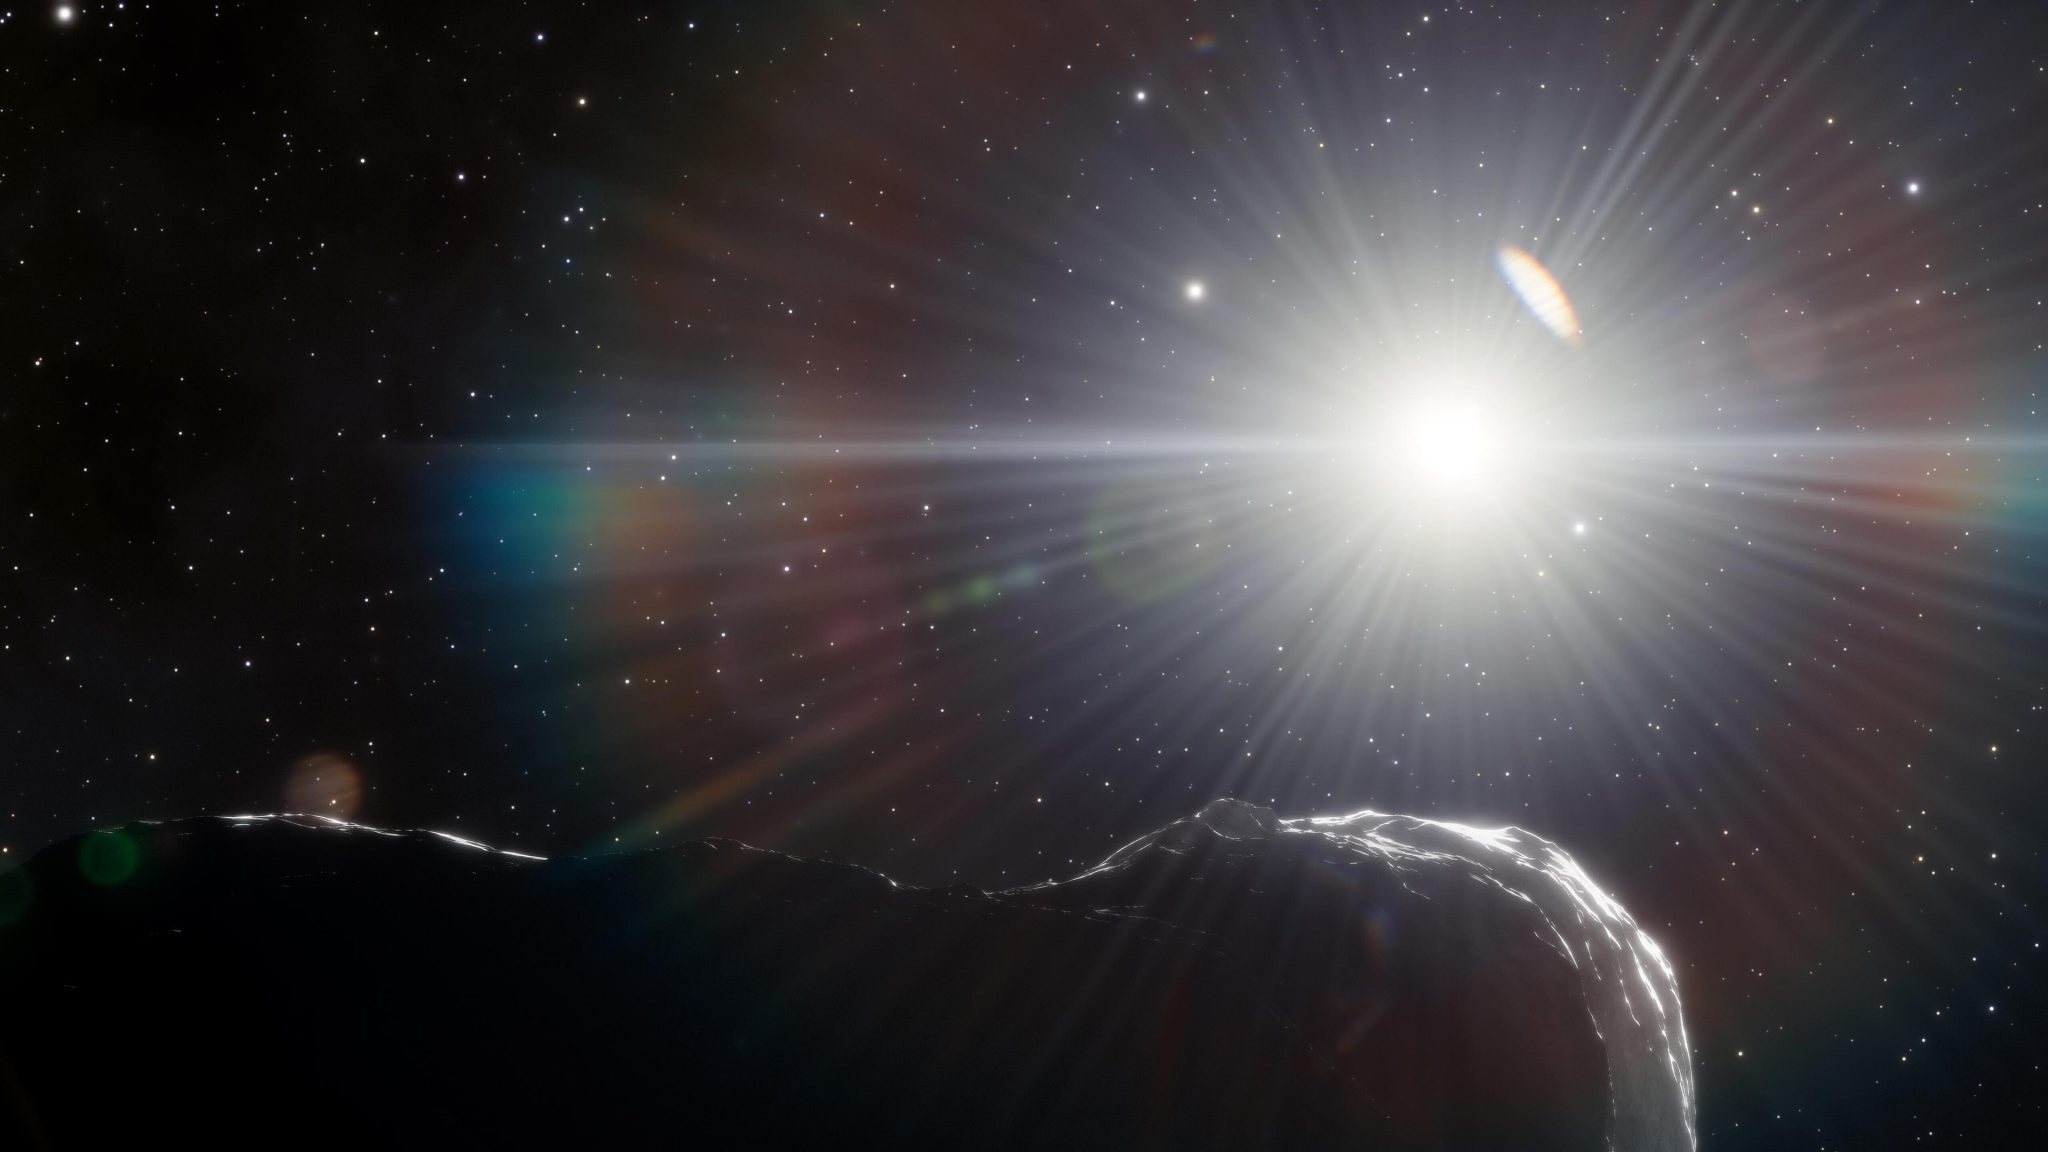 The asteroid's orbit is closer to the Sun than Earth's orbit